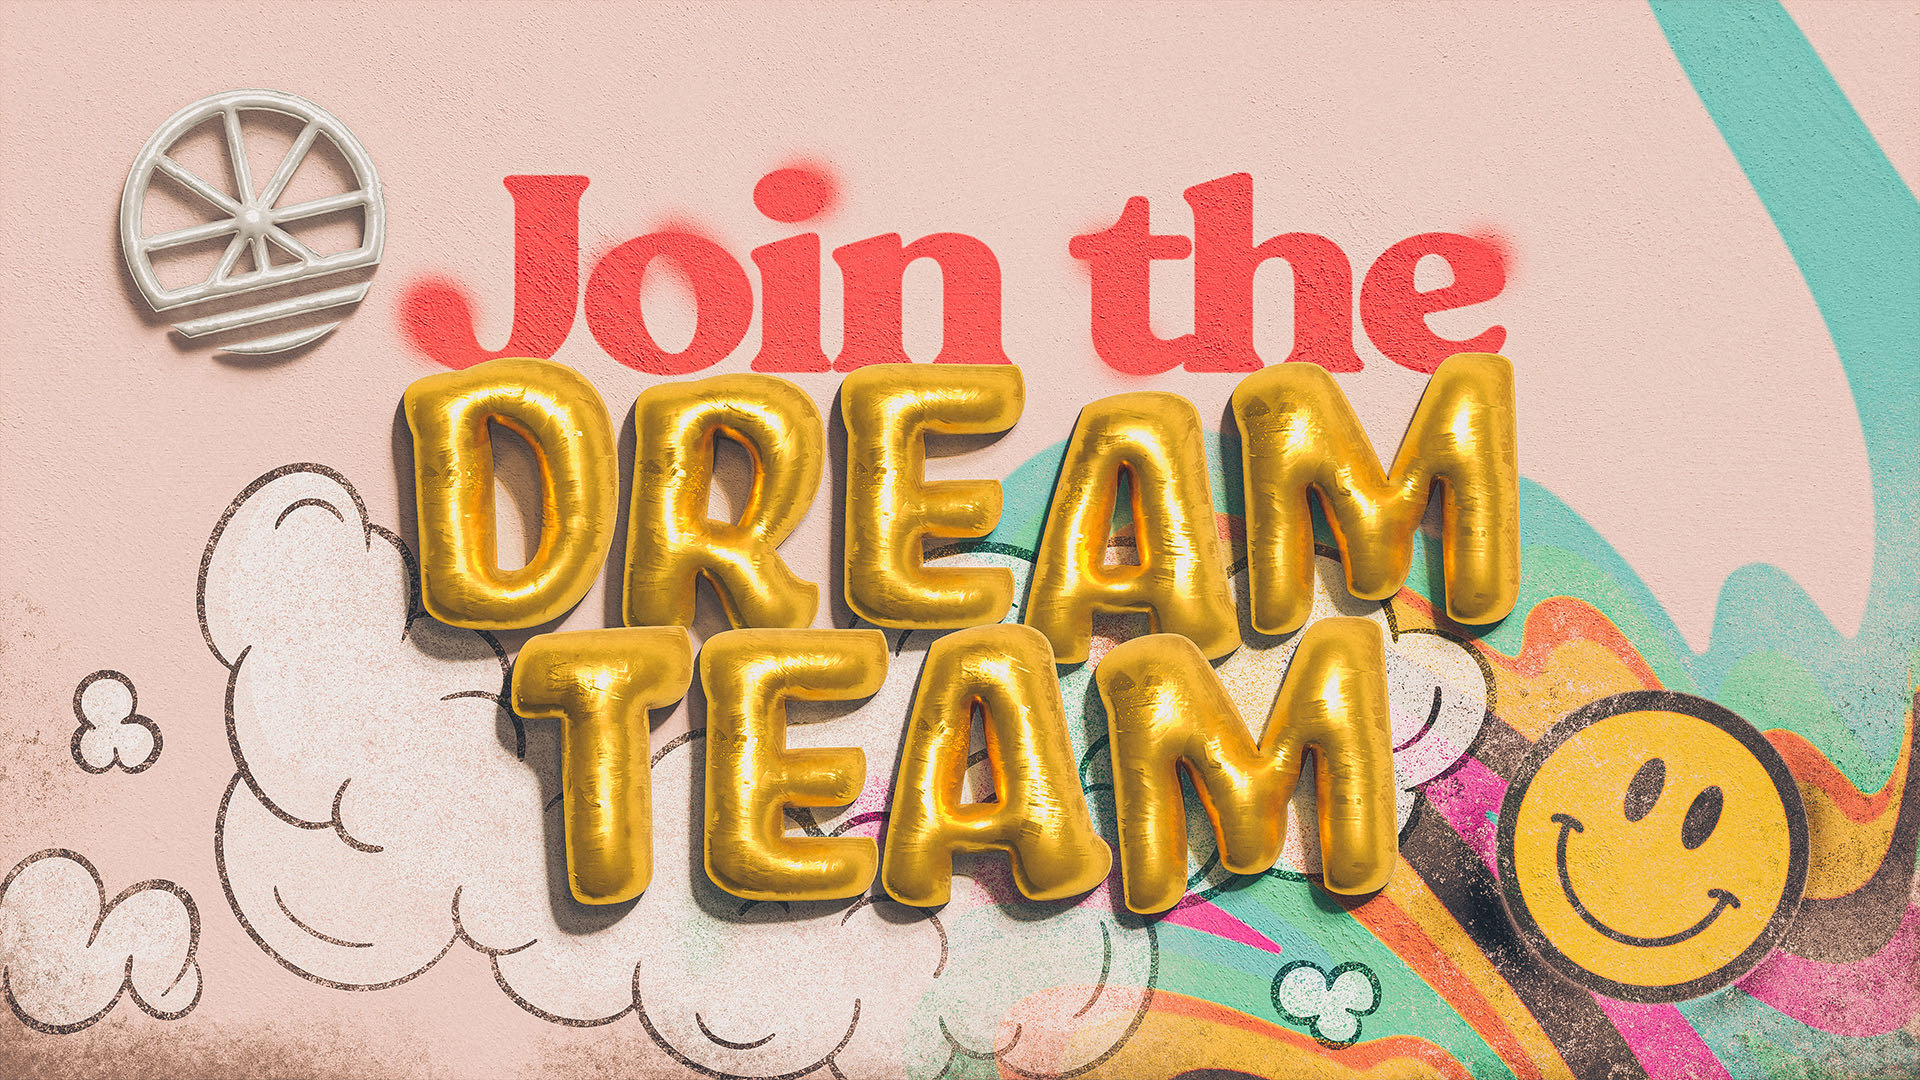 Join The Dream Team